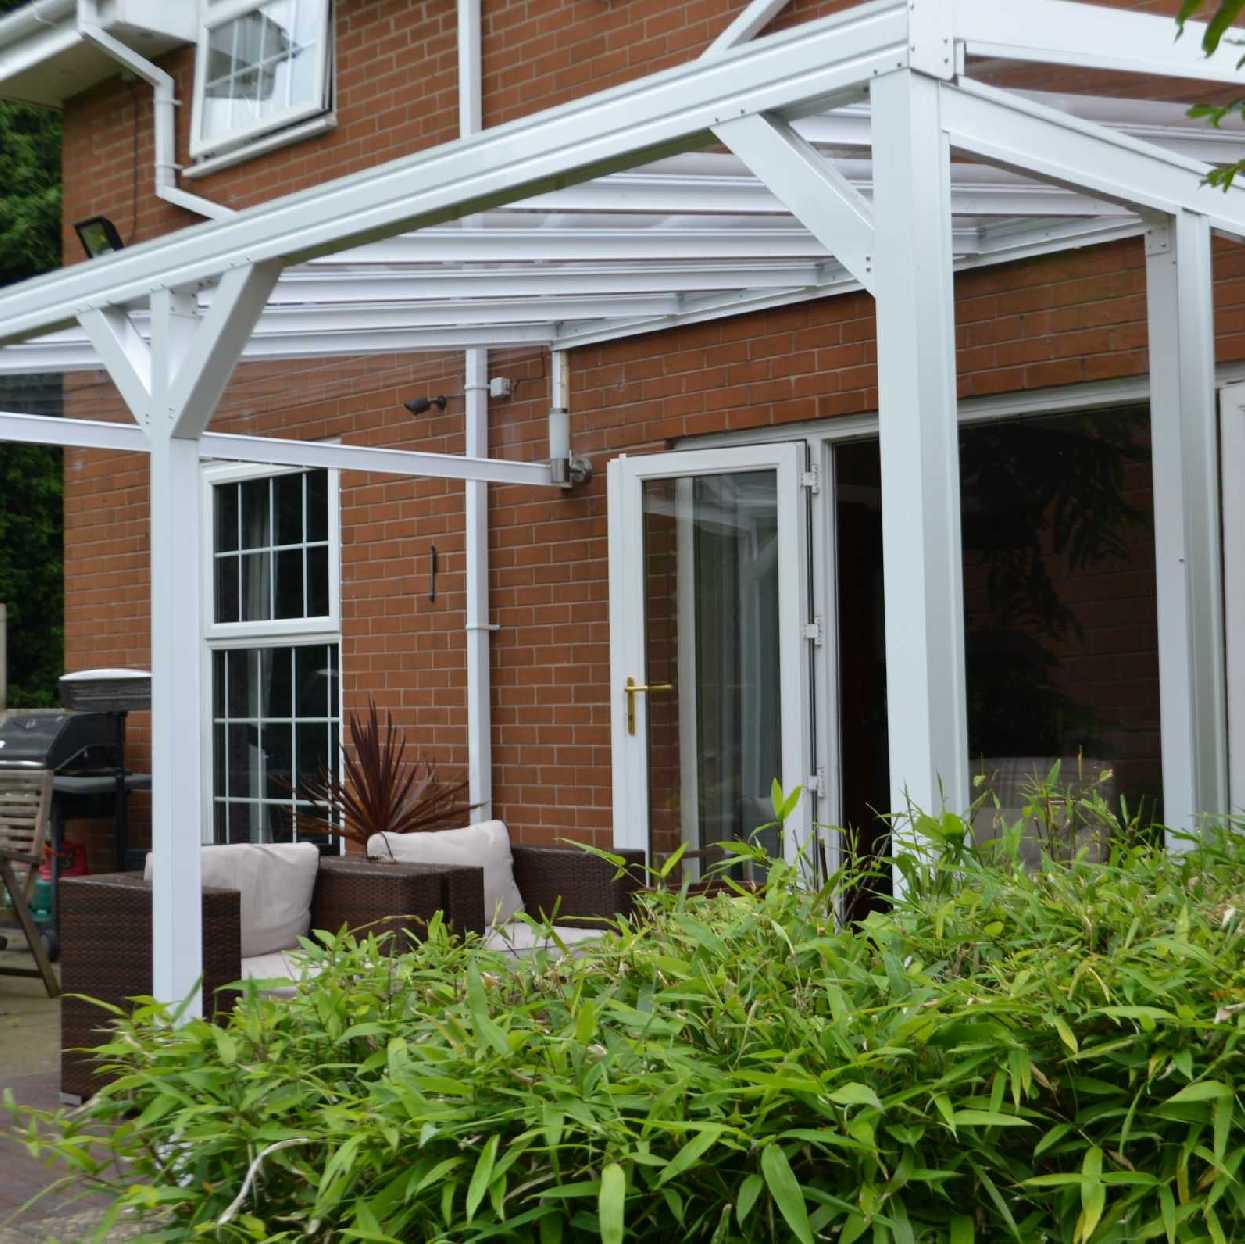 Omega Smart Lean-To Canopy, White with 6mm Glass Clear Plate Polycarbonate Glazing - 2.1m (W) x 2.0m (P), (2) Supporting Posts from Omega Build